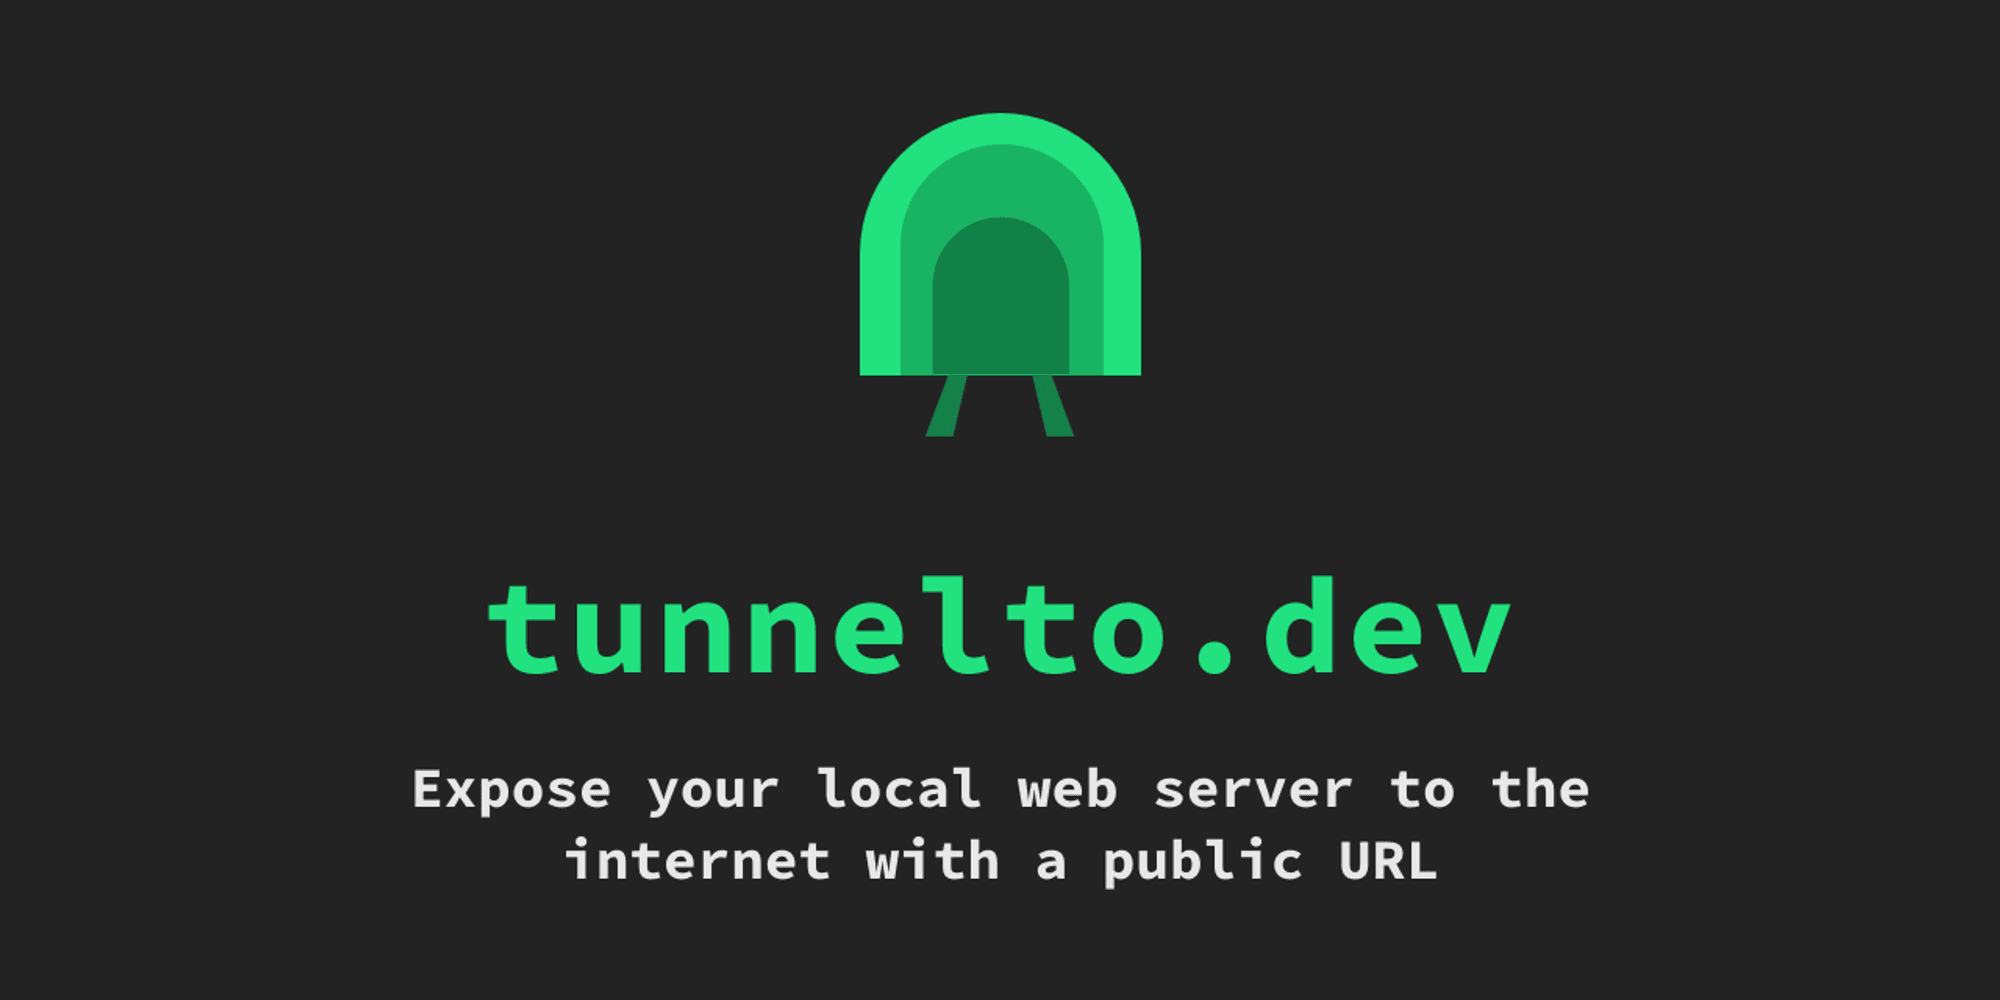 tunnelto.dev -- expose your local web server to the internet with a public URL